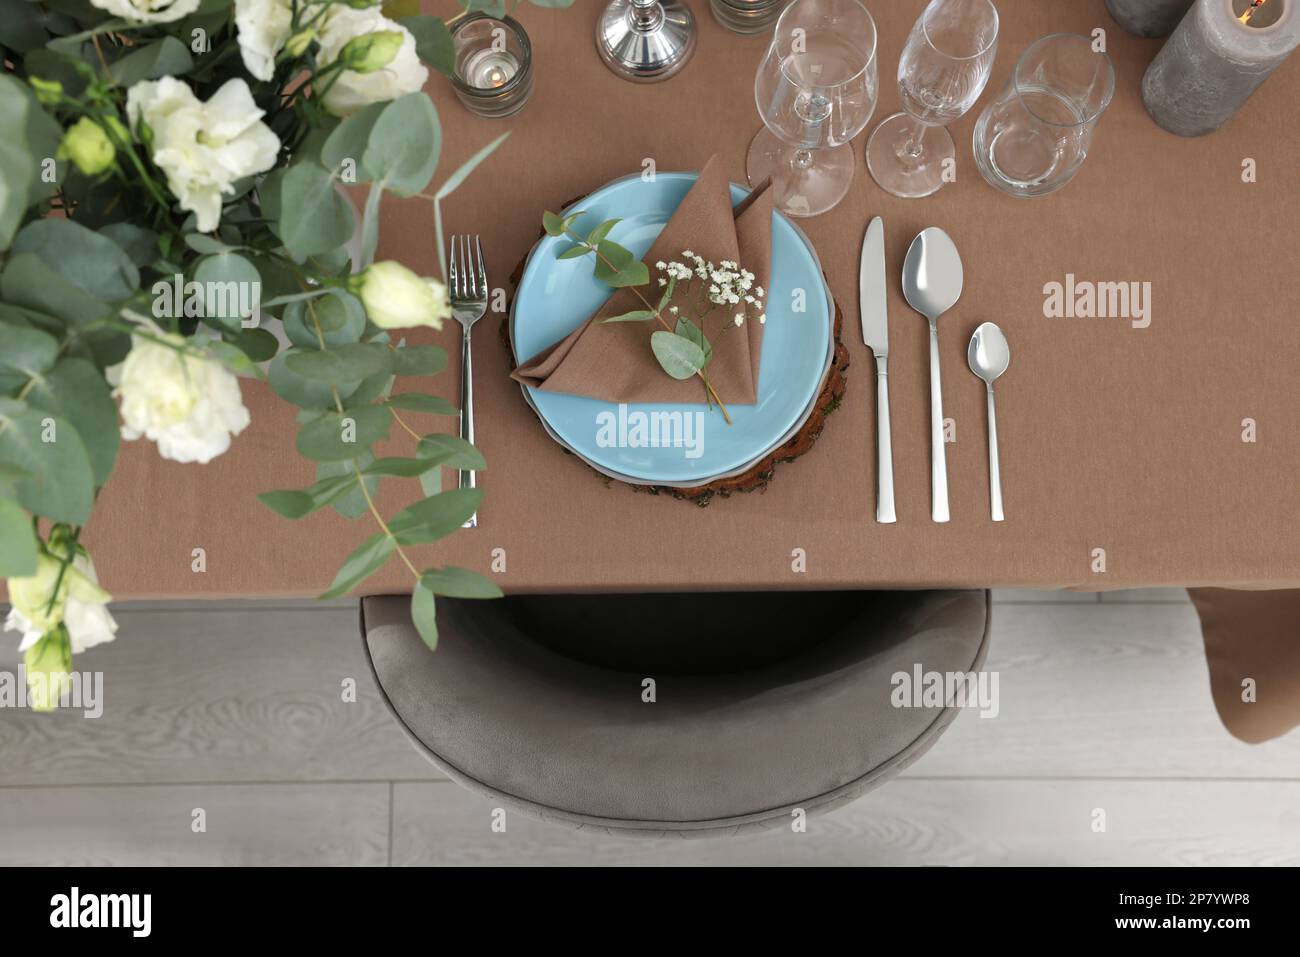 Festive table setting with beautiful tableware and decor indoors, top view Stock Photo